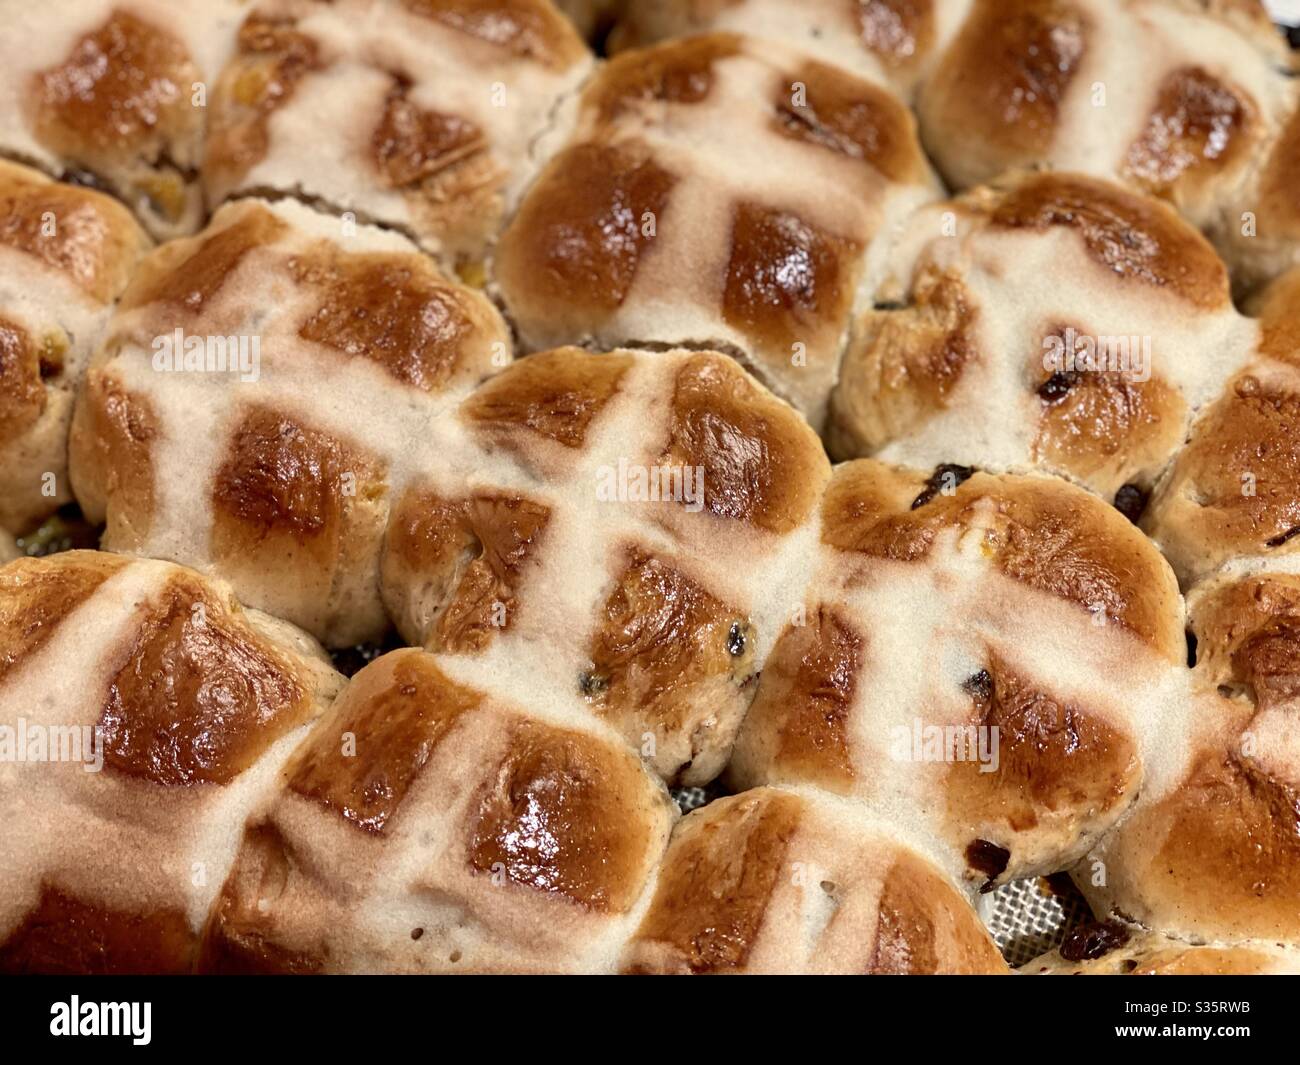 Overhead view, detail of freshly baked, fruit-filled Hot Cross Buns, cooling on a rack. Traditional Good Friday / Easter baked goods. Stock Photo